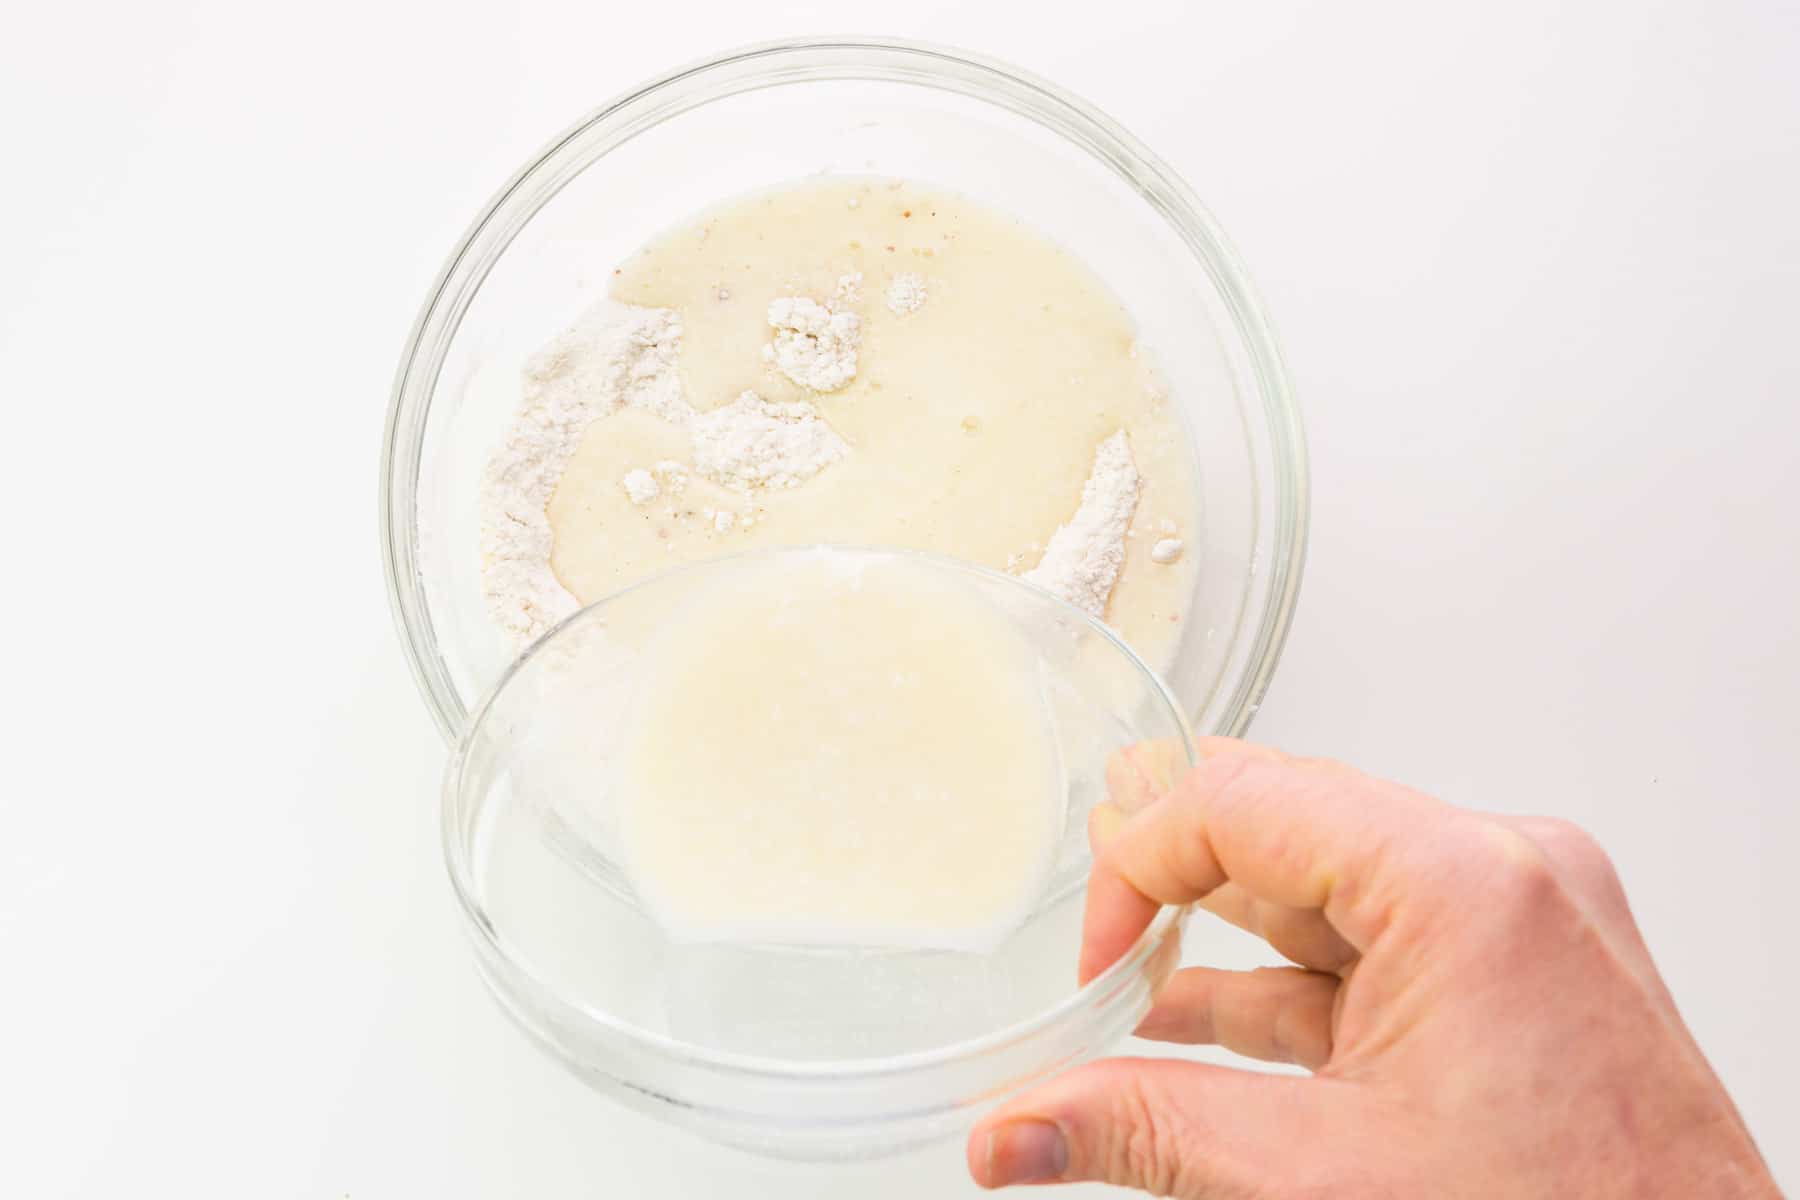 A hand holds a bowl, during wet ingredients into a bowl with flour ingredients.